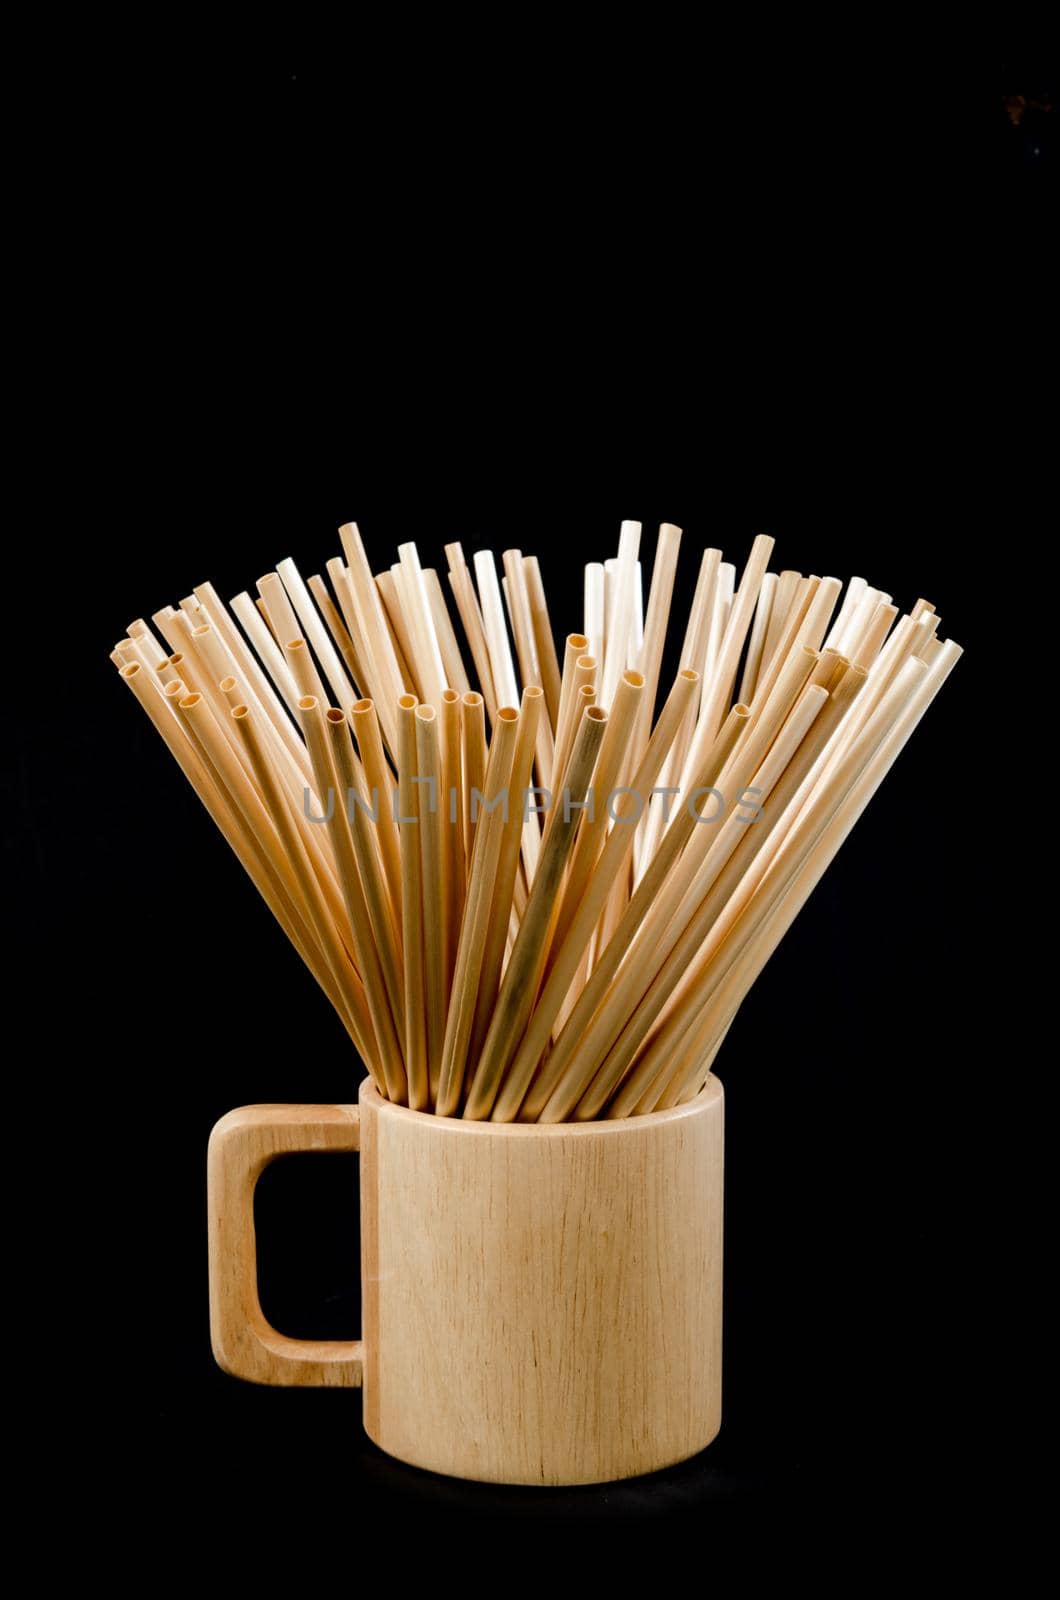 Wheat straw for drinking water in wooden glass on black background. Zero waste concept.